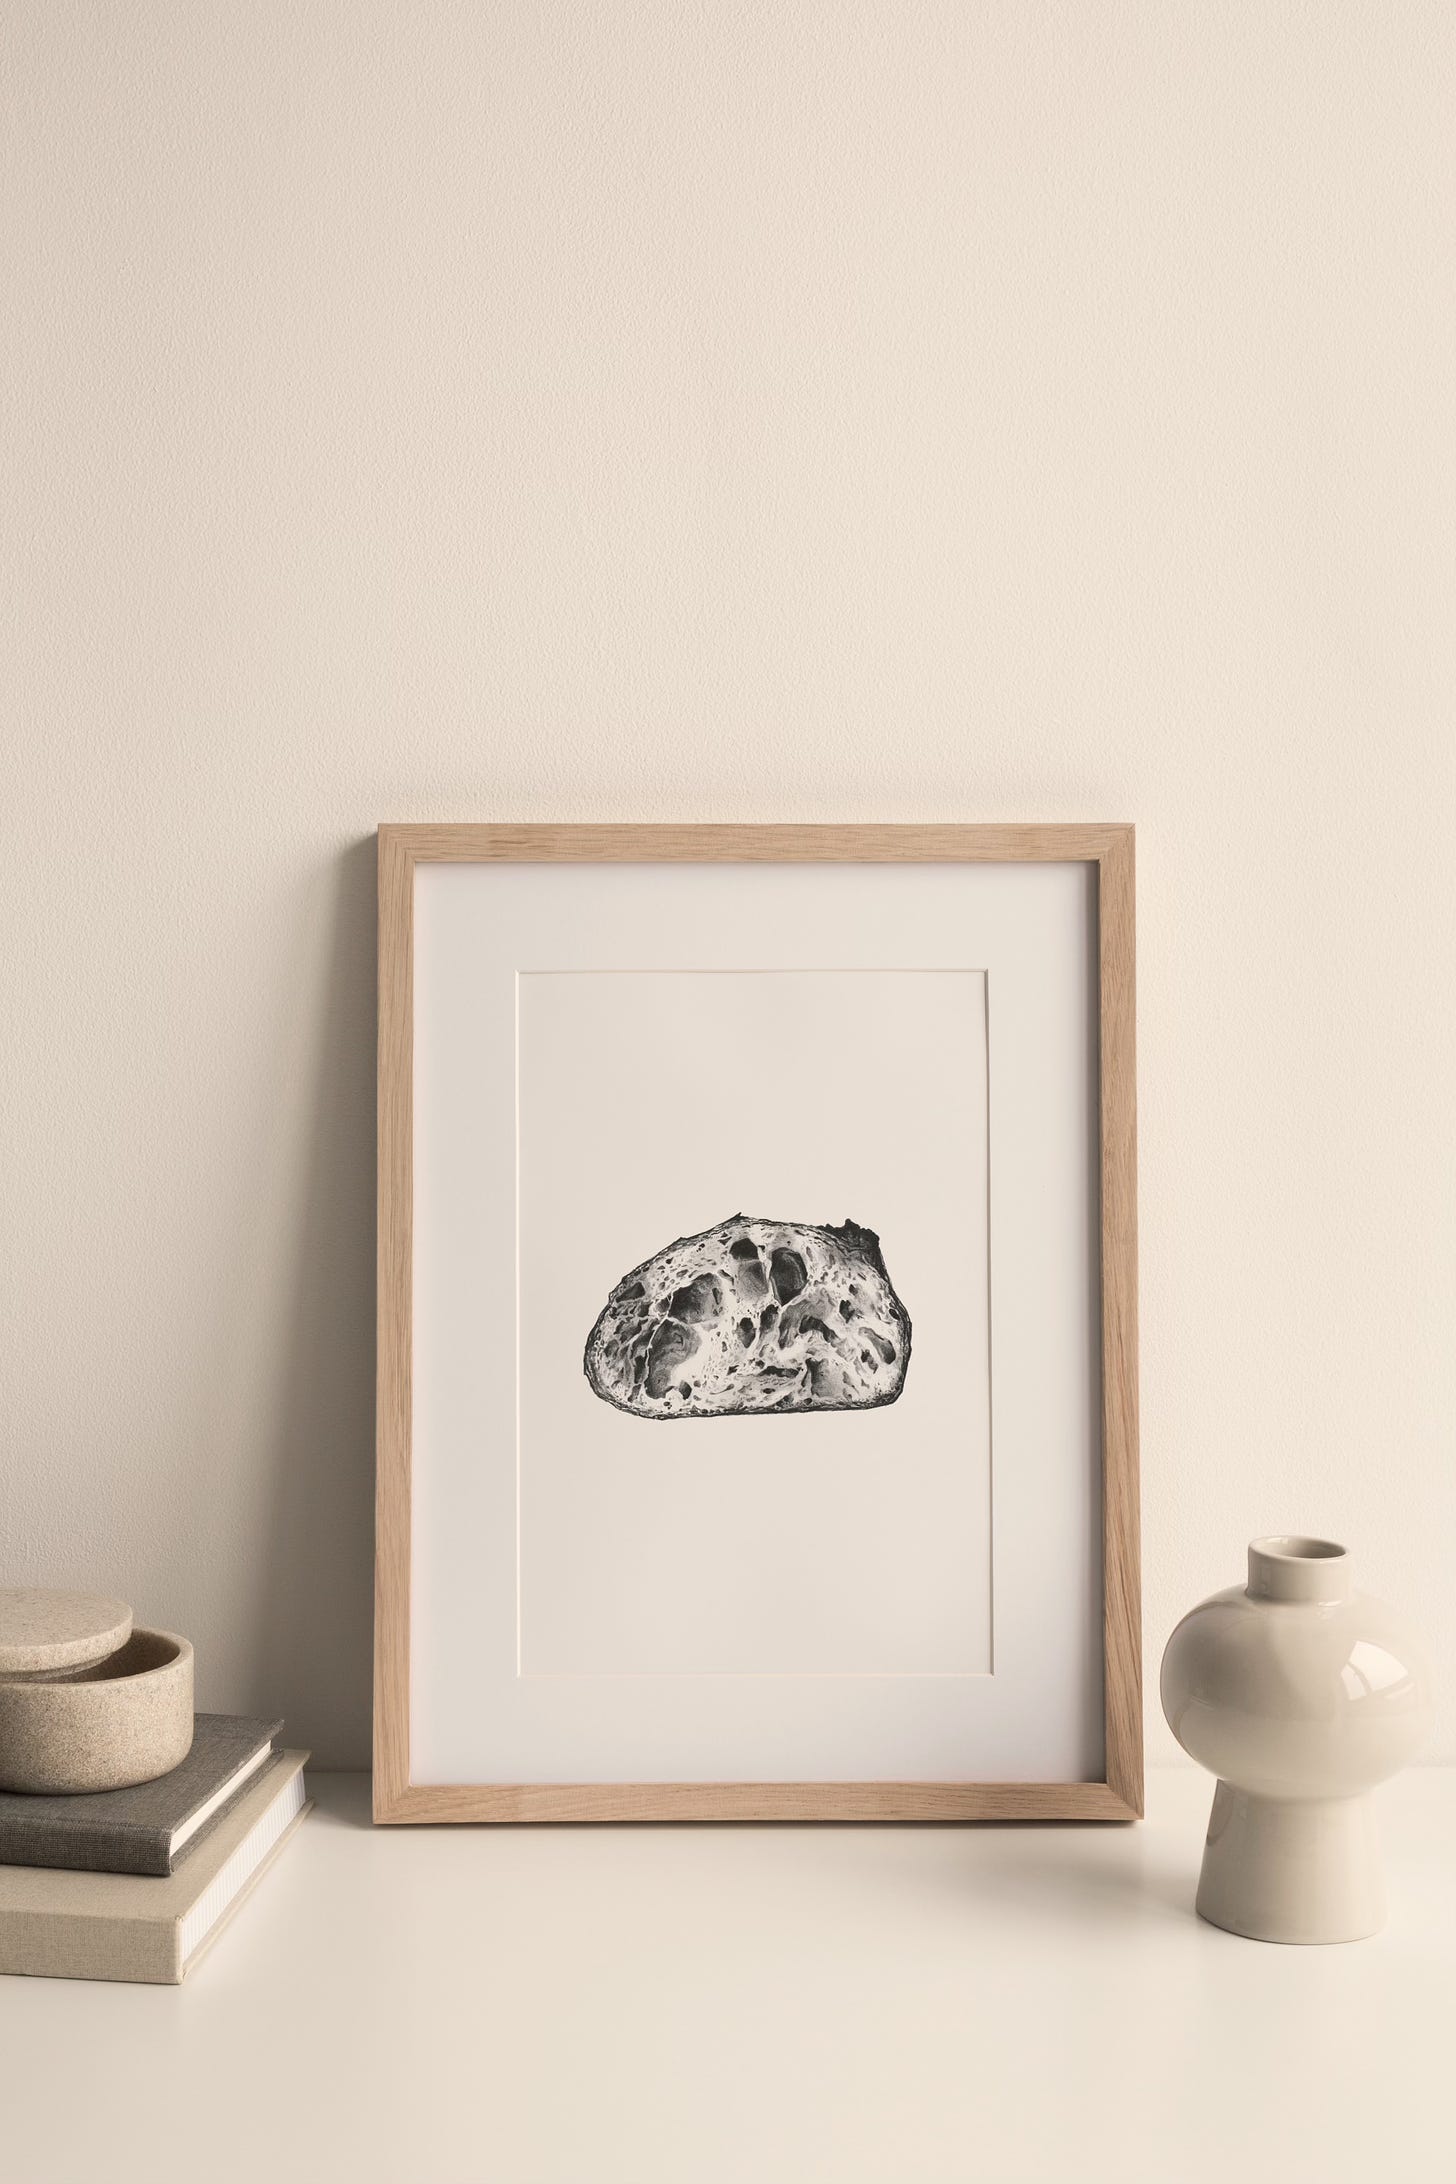 A sourdough pencil drawing in a frame, sitting on a surface with some books to the left and a vase to the right